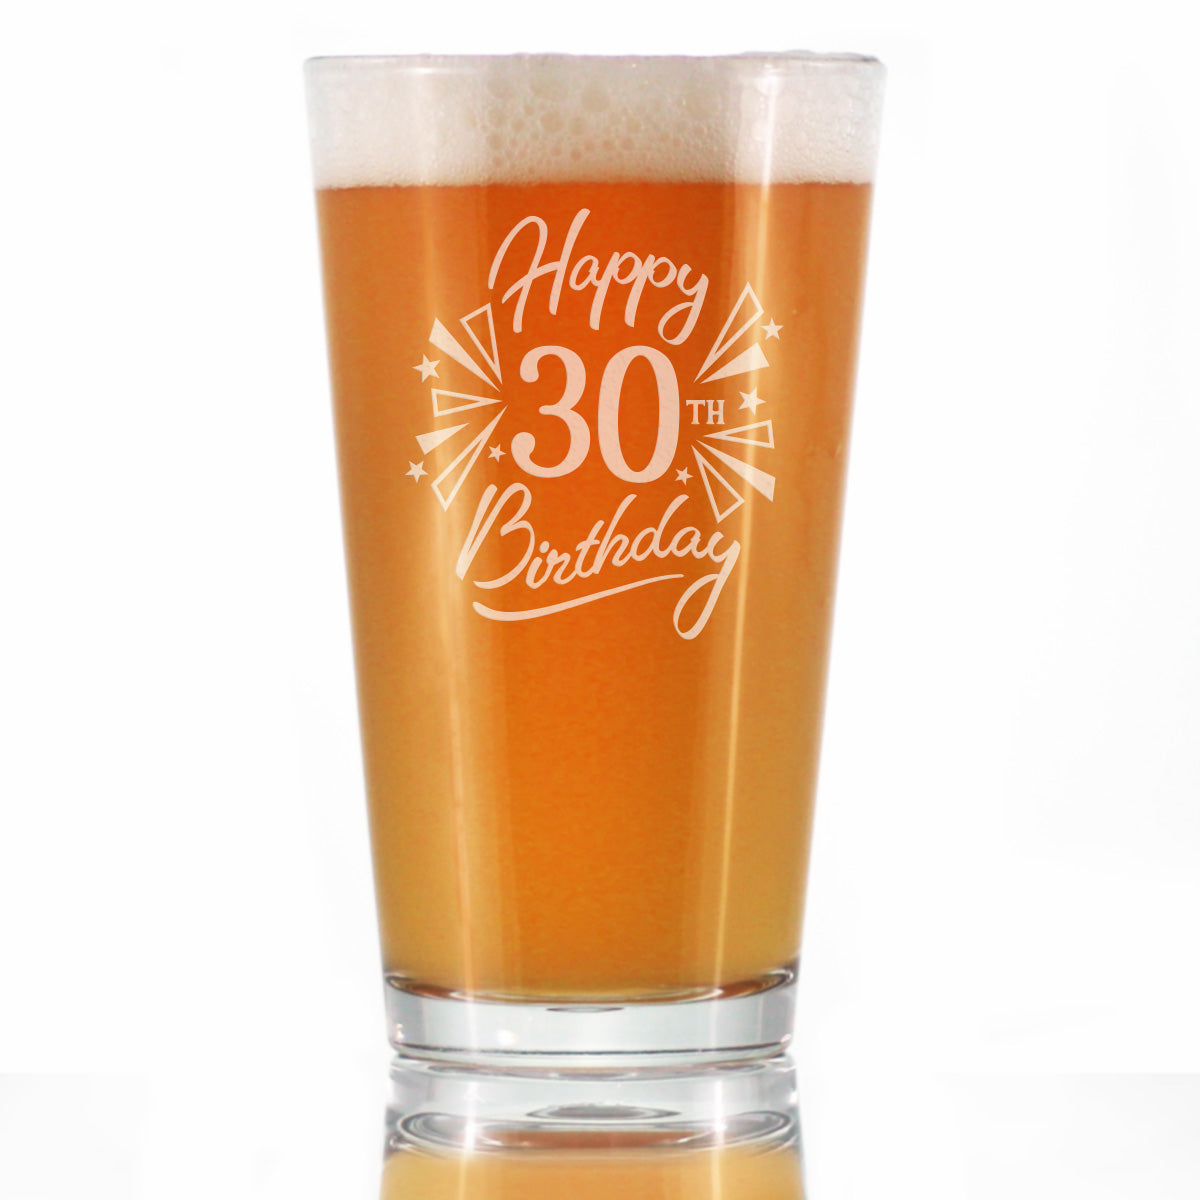 Happy 30th Birthday - Pint Glass for Beer - Gifts for Women & Men Turning 30 - Fun Bday Party Decor - 16 Oz